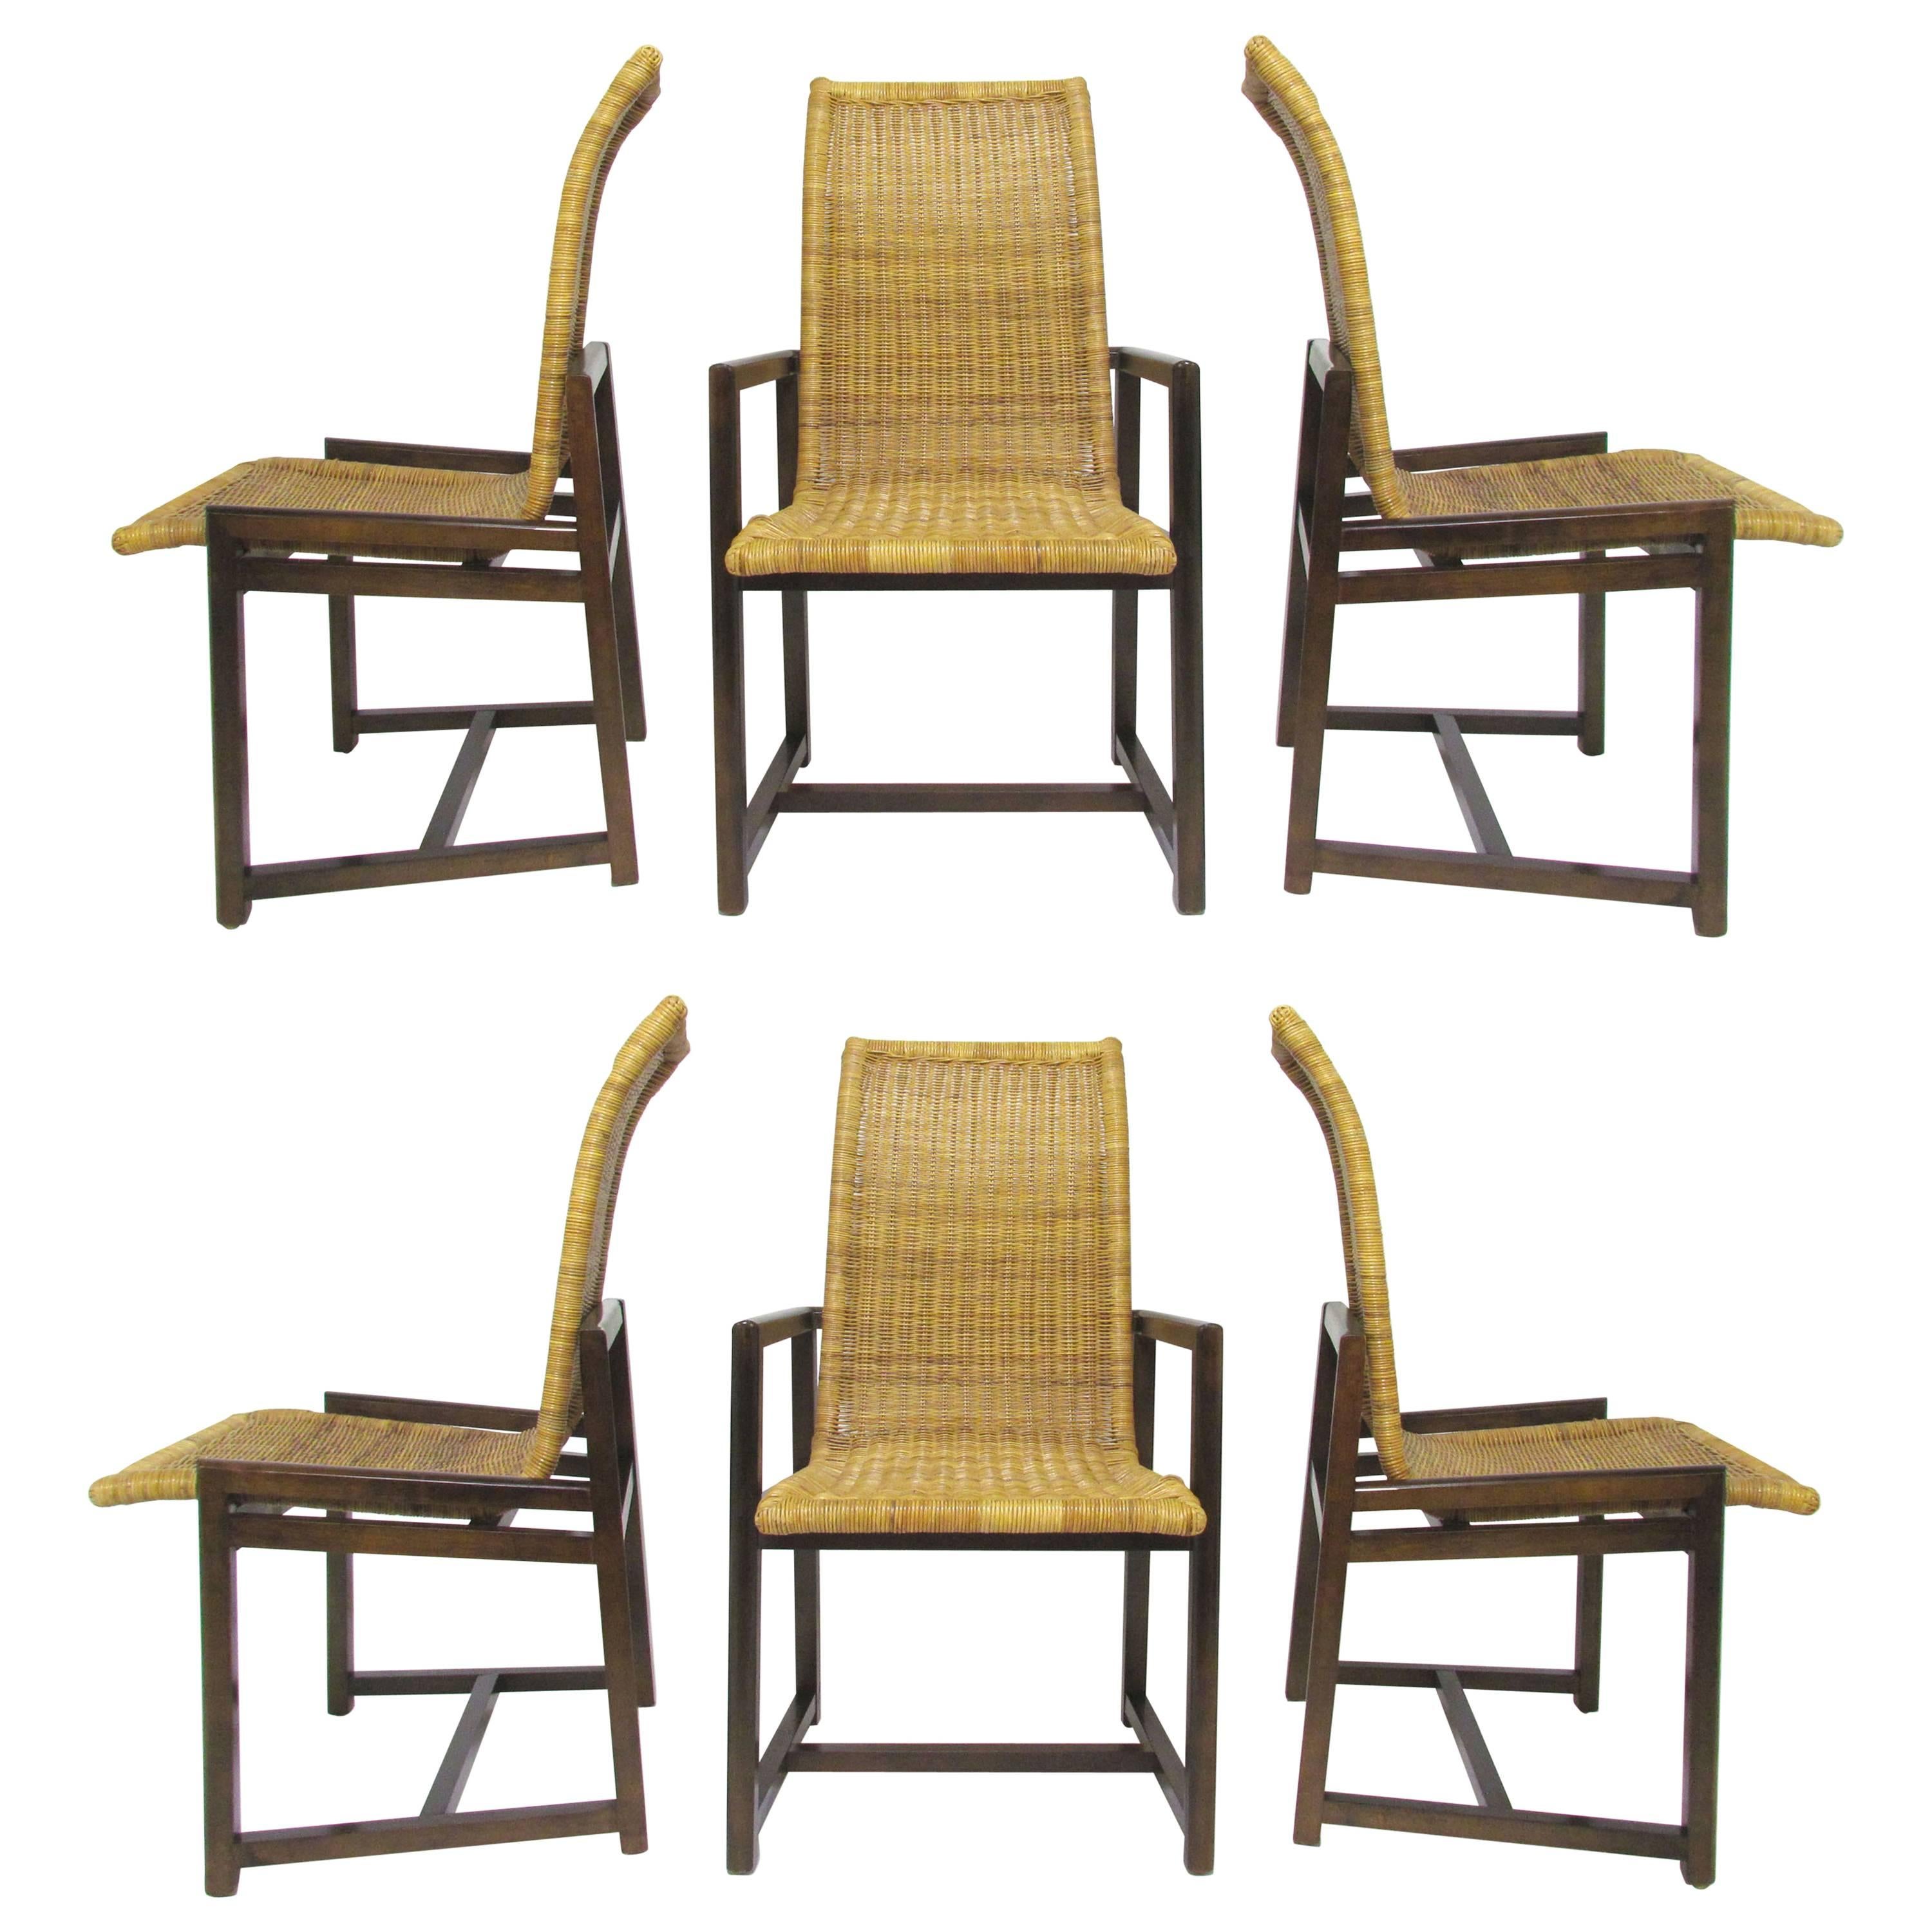 Set of Six Mid-Century Walnut and Rattan Dining Chairs, circa 1970s